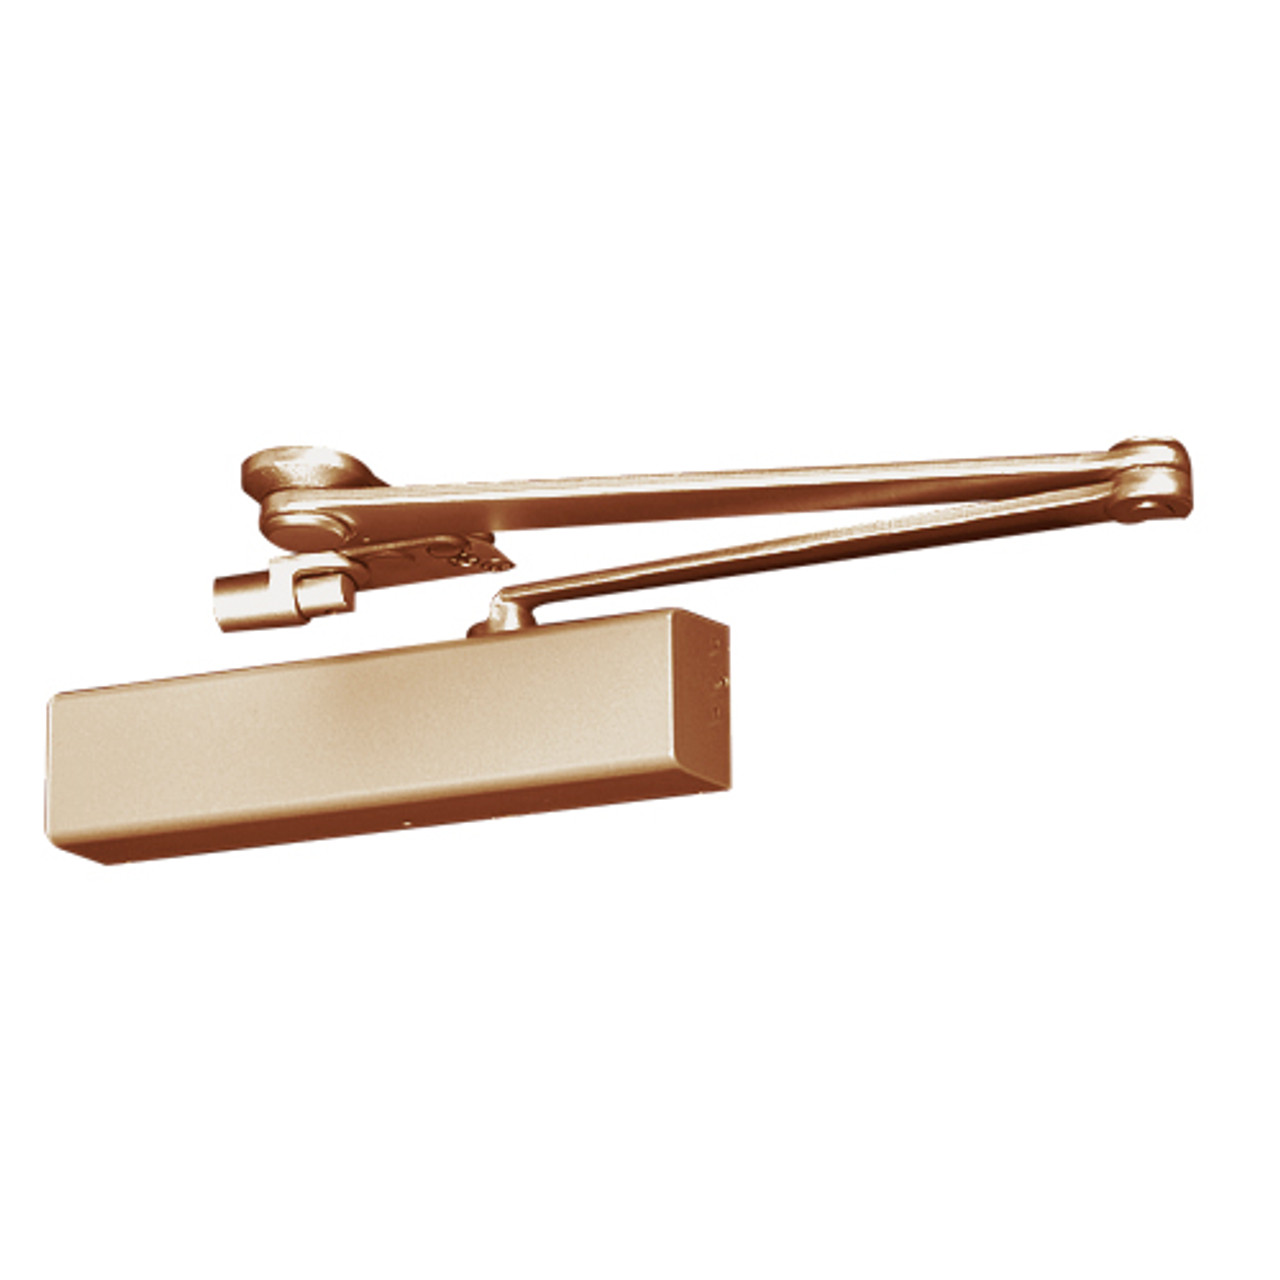 CPS8501TDA-691 Norton 8000 Series Full Cover Hold Open Door Closers with CloserPlus Spring Arm in Dull Bronze Finish